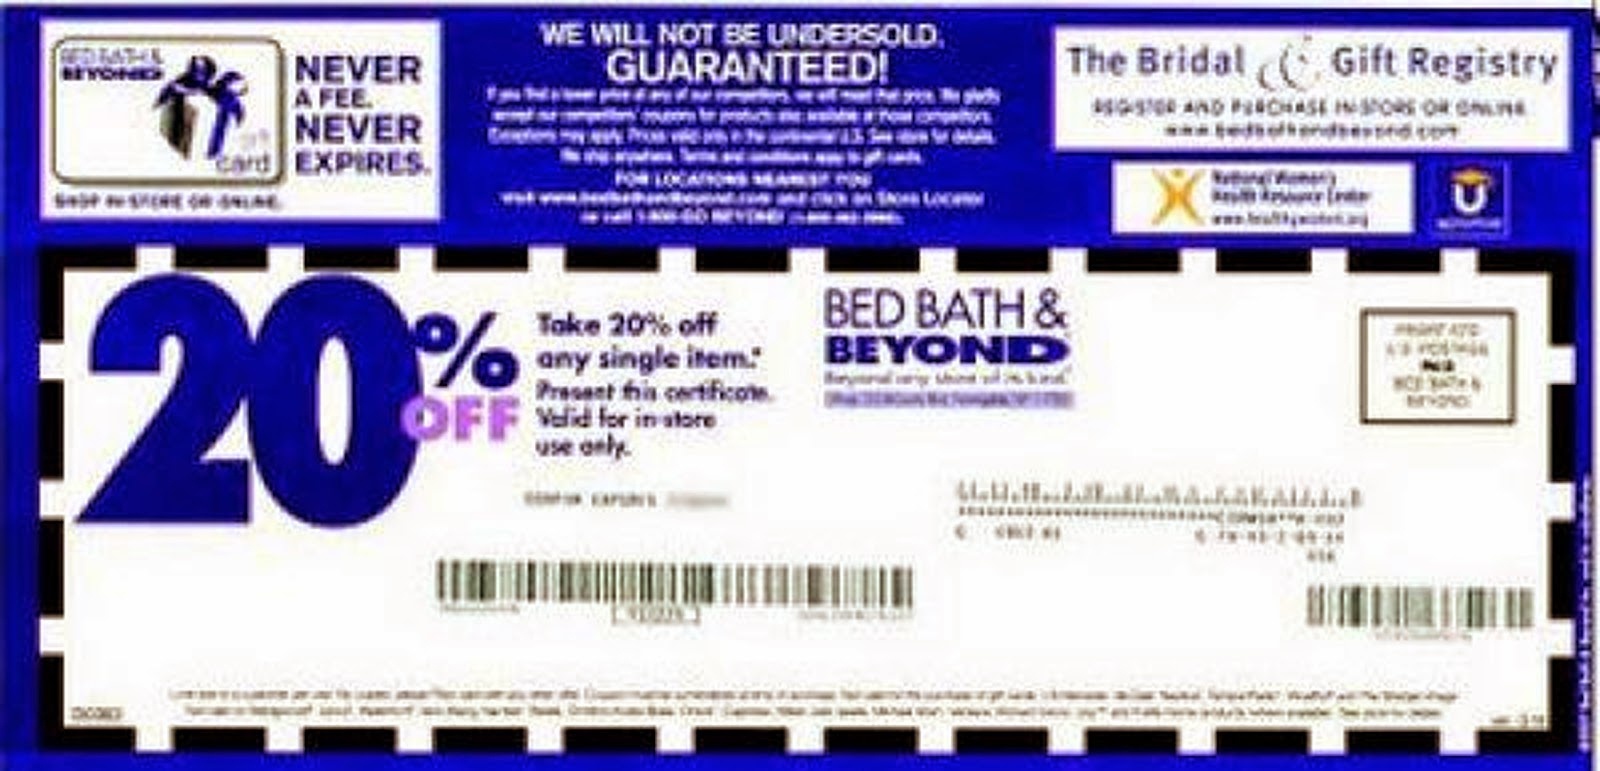 Bed Bath And Beyond Coupons | Bed Bath And Beyond Coupons - Free Printable Bed Bath And Beyond 20 Off Coupon